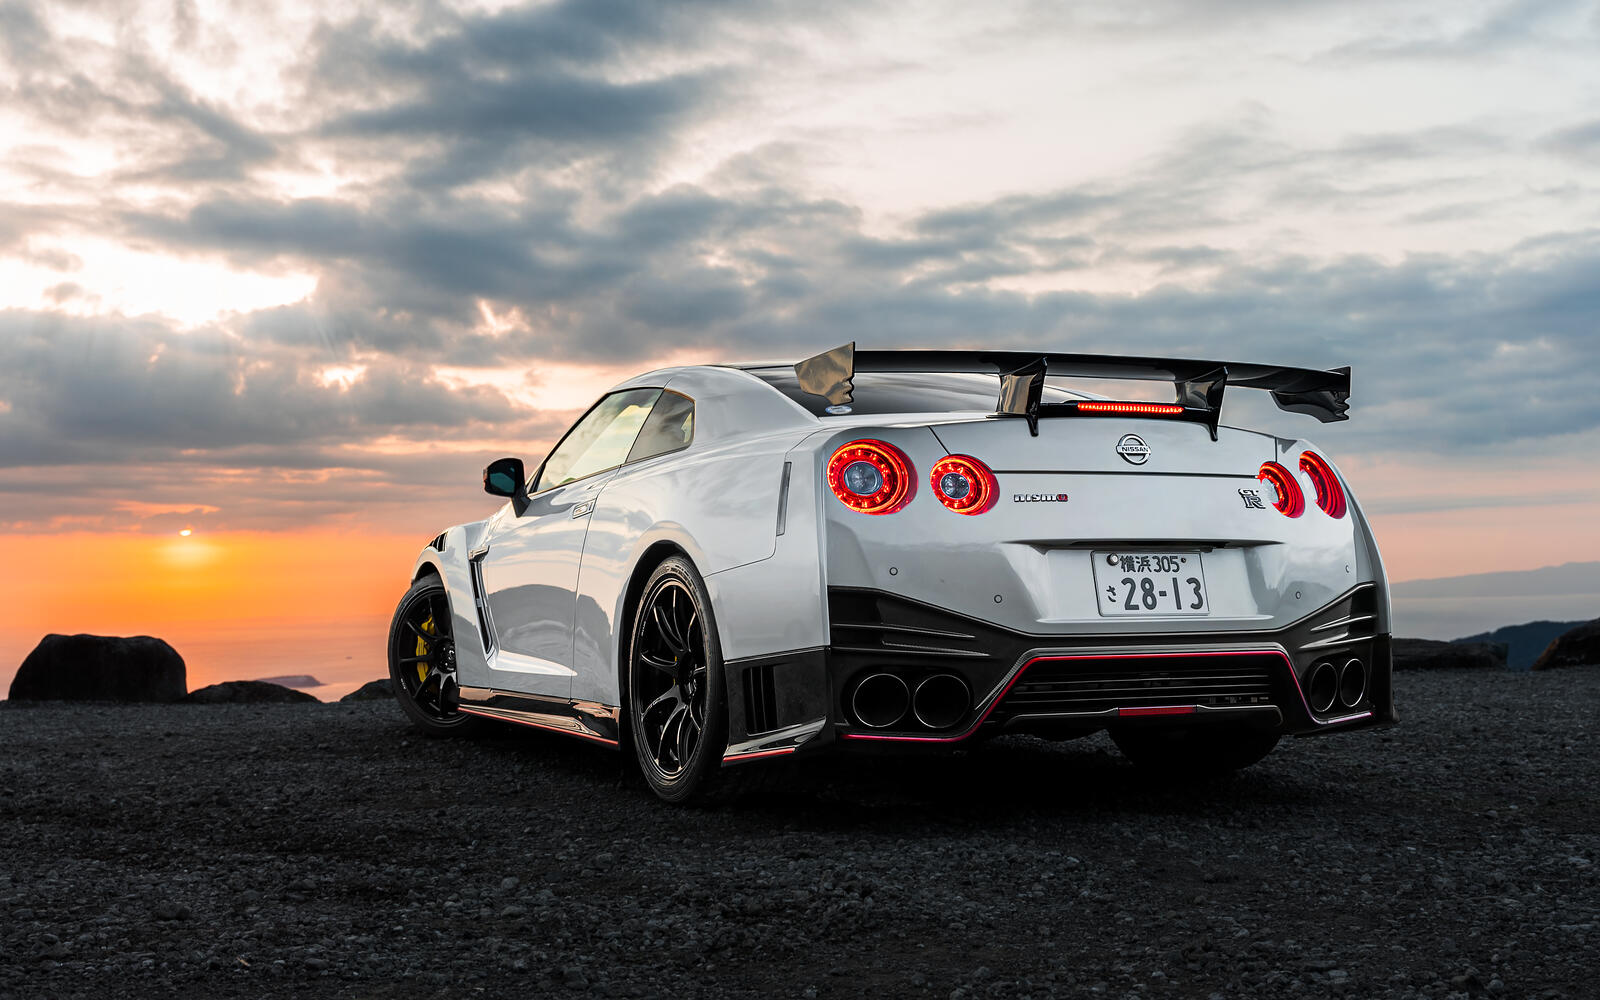 Free photo Nissan GTR rear view at sunset